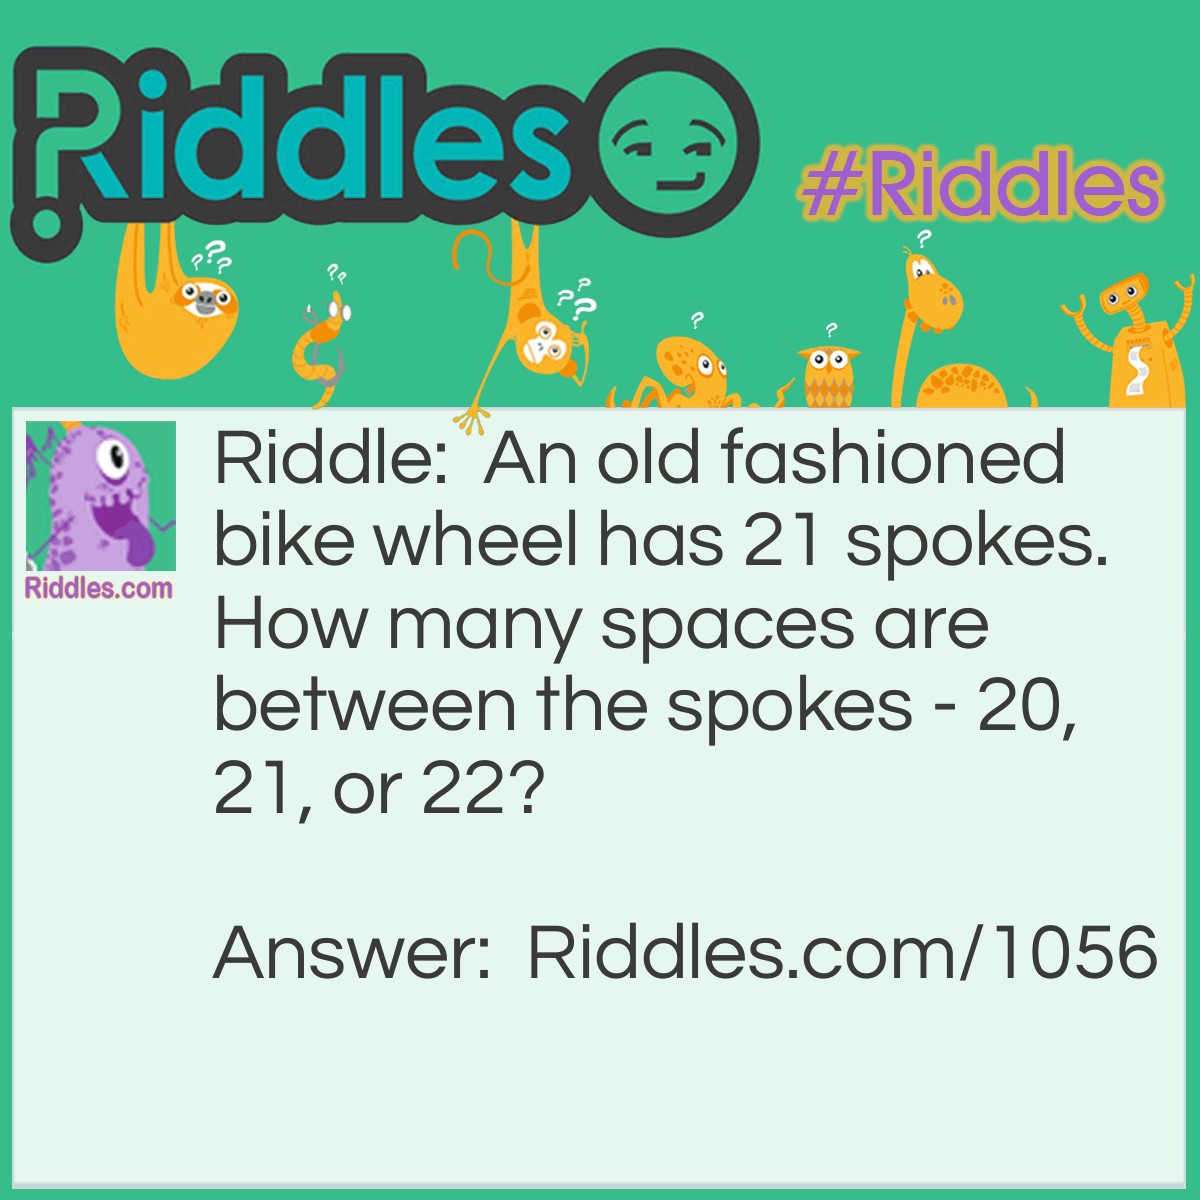 Riddle: An old fashioned bike wheel has 21 spokes. How many spaces are between the spokes - 20, 21, or 22? Answer: 21